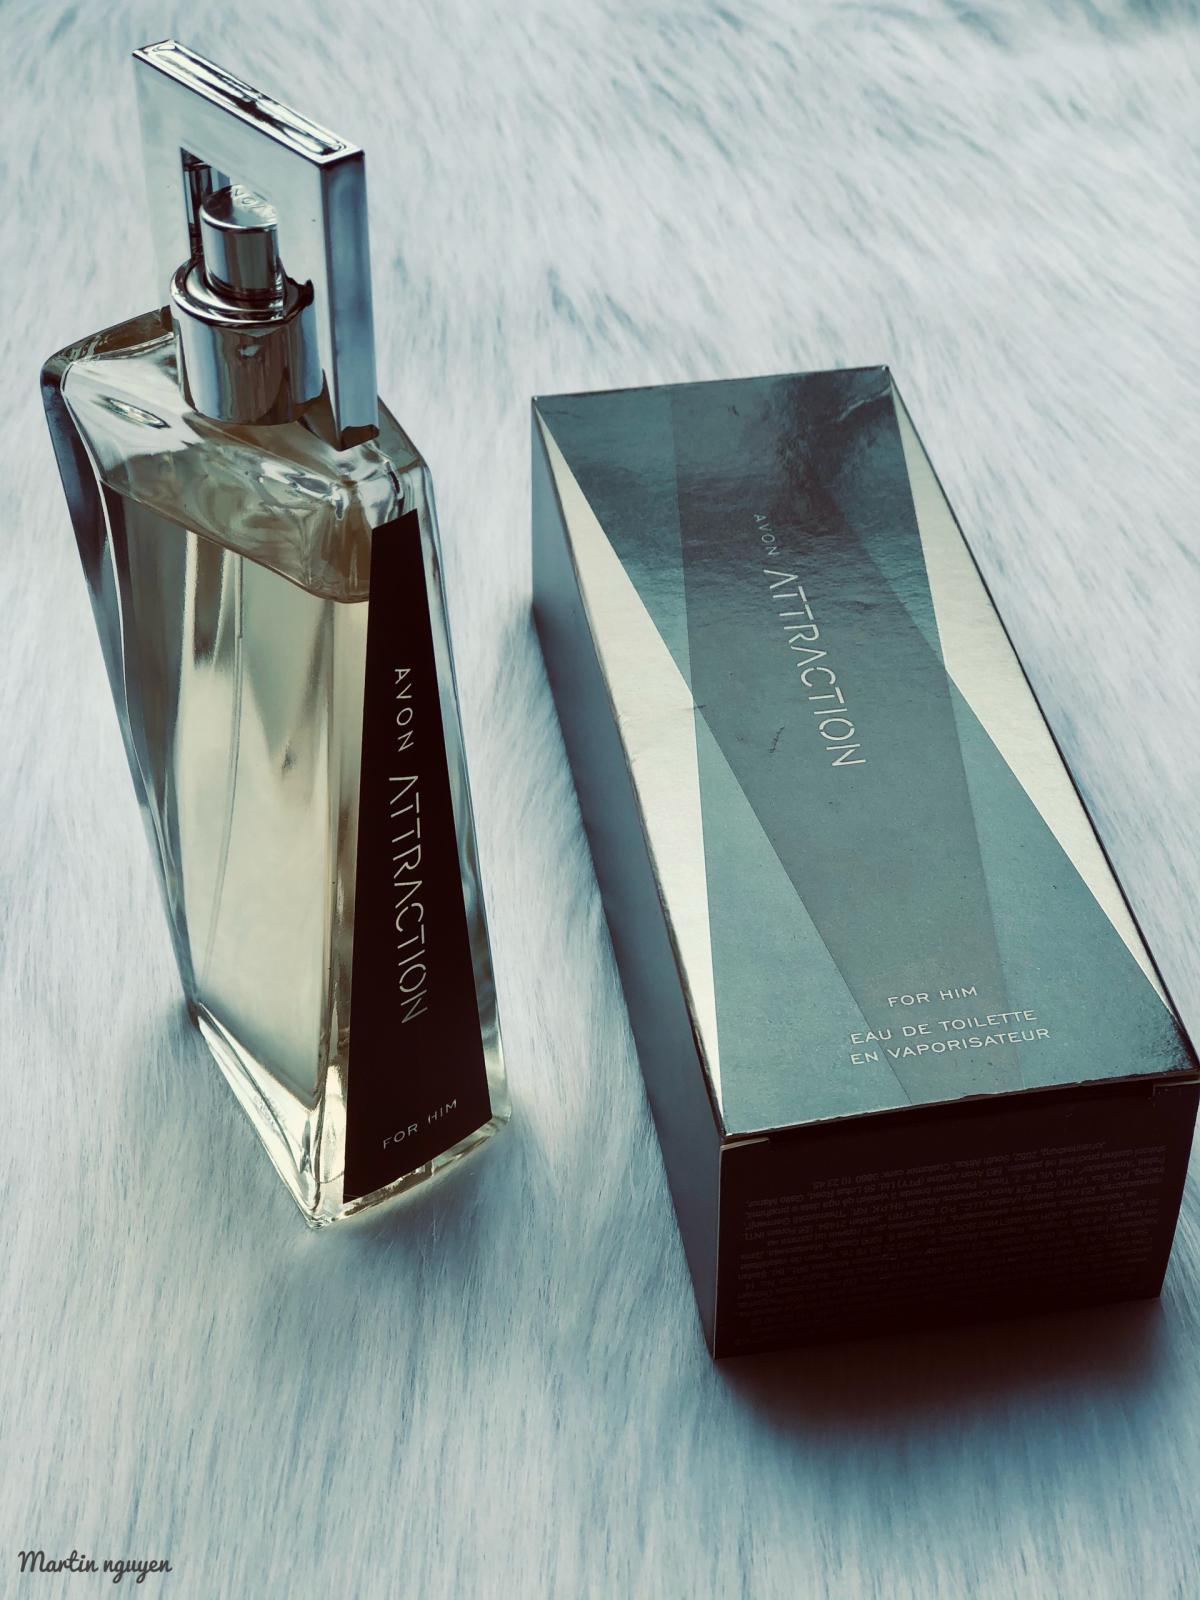 Attraction Avon cologne - a fragrance for men 2015